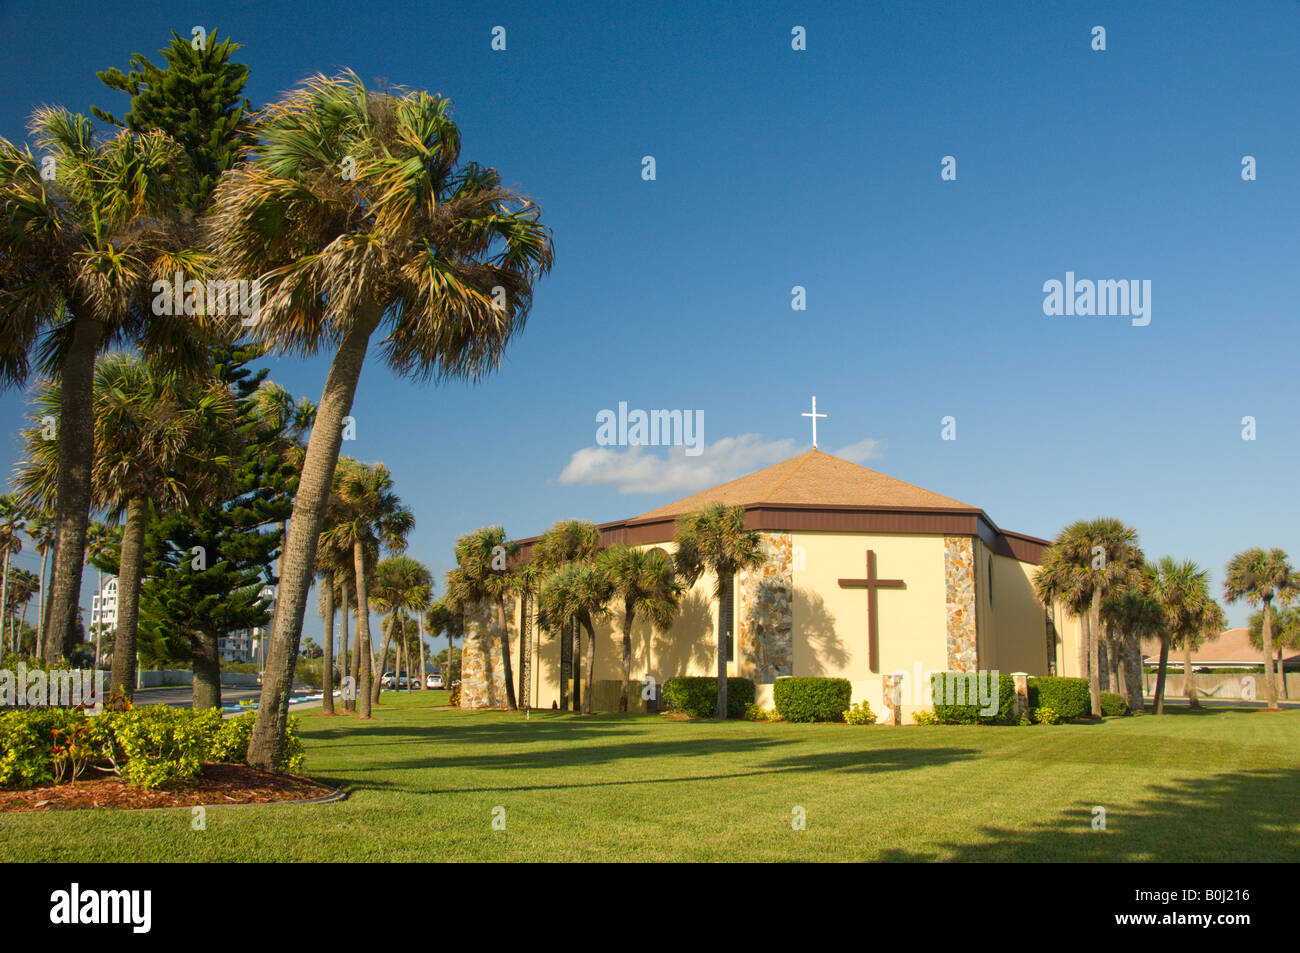 The Immaculate Conception Roman Catholic Church in Florida USA Stock Photo